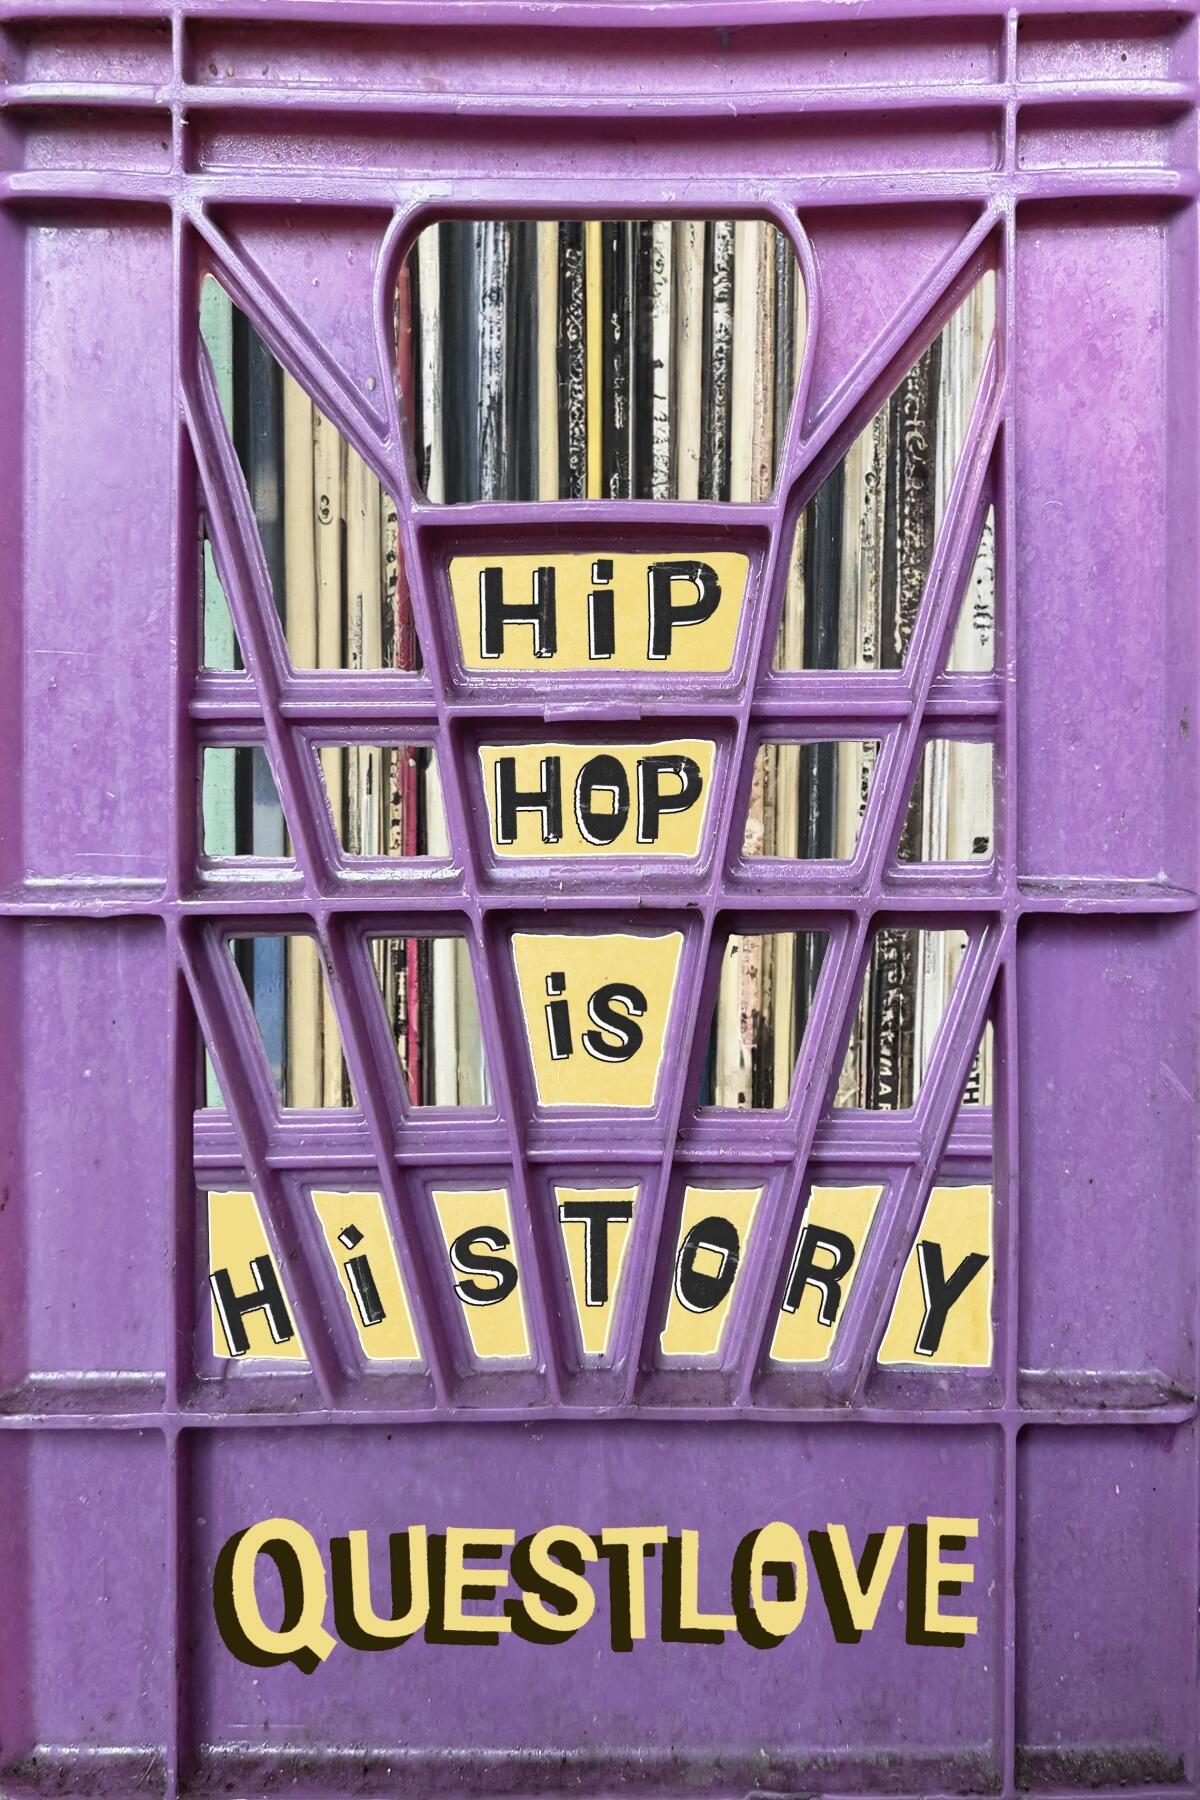 Purple book cover with title "Hip-Hop Is History," by Questlove